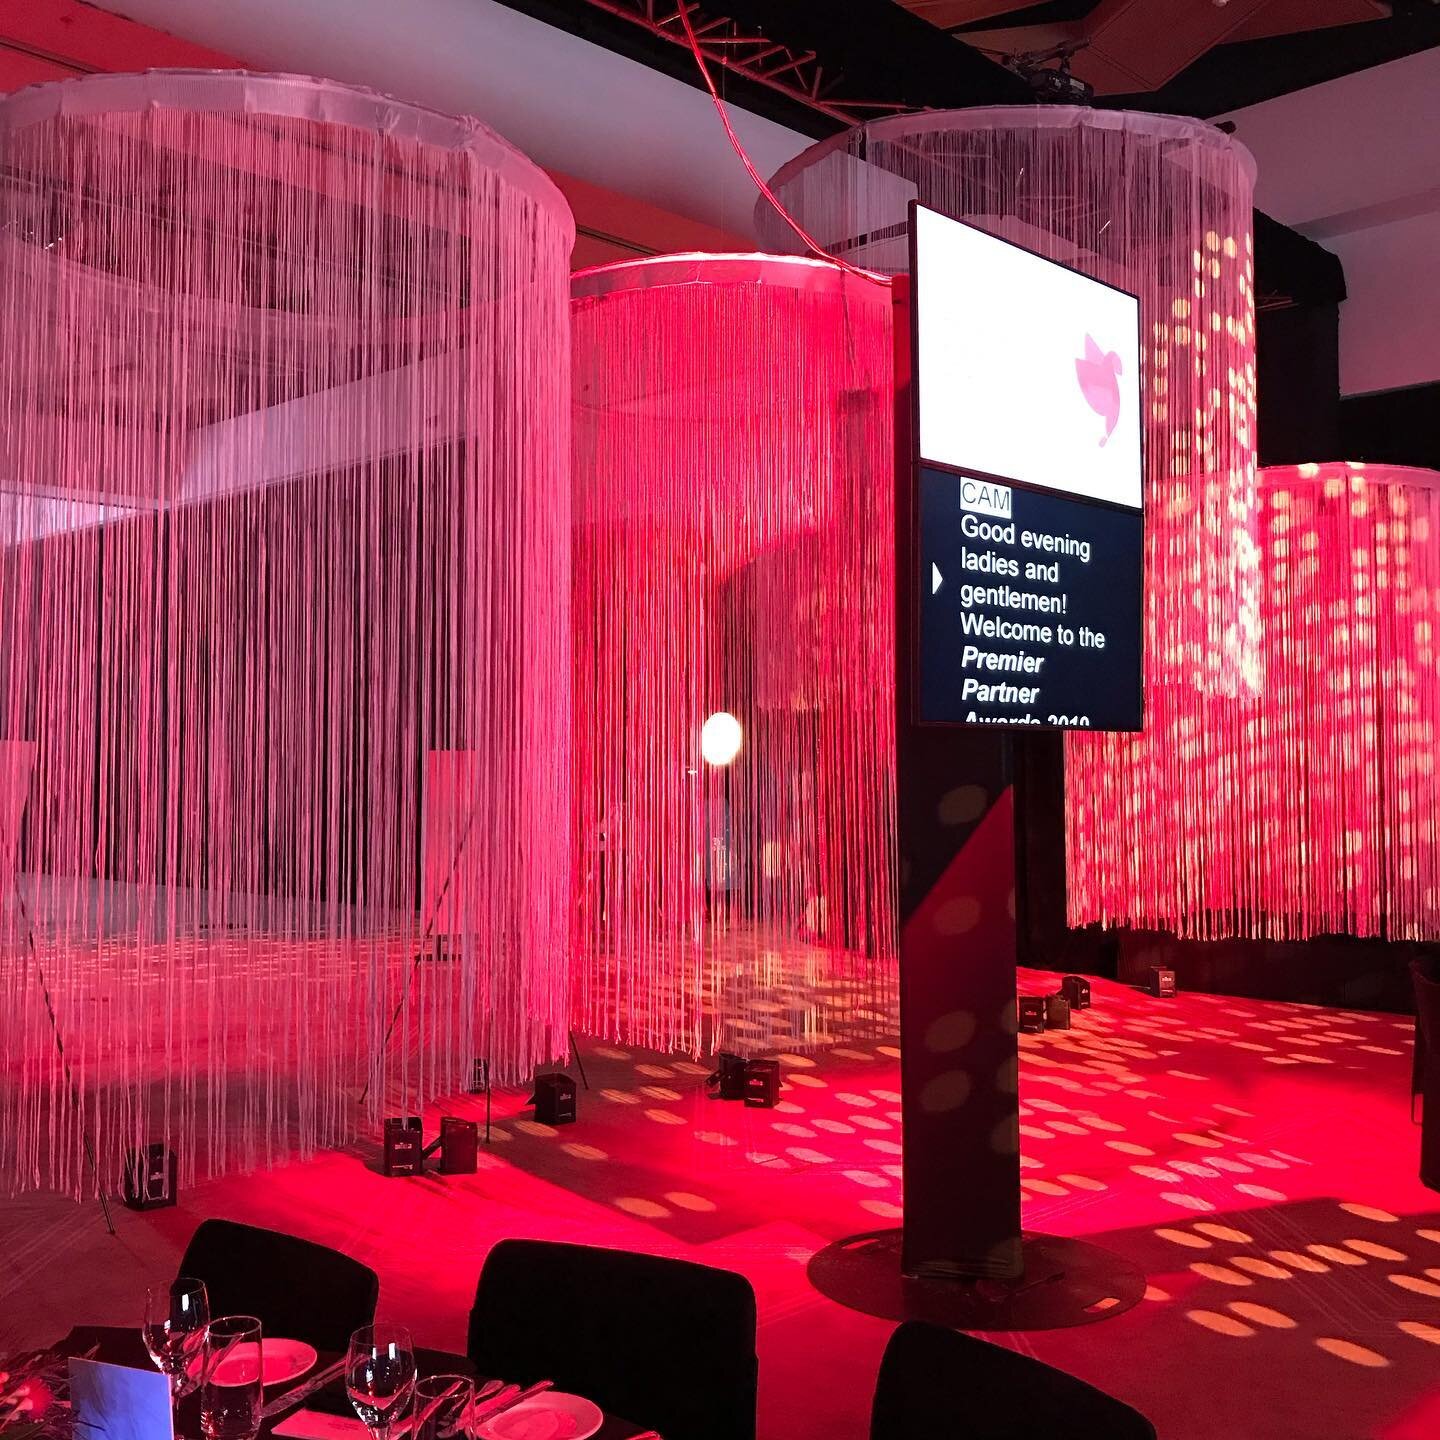 Throw🔙 Thursday: 
Dinner for Google executives with beautiful string draping design to seperate two rooms 

#sydneyevents #sydneydrapehire #sydneydraping #drapes #draping